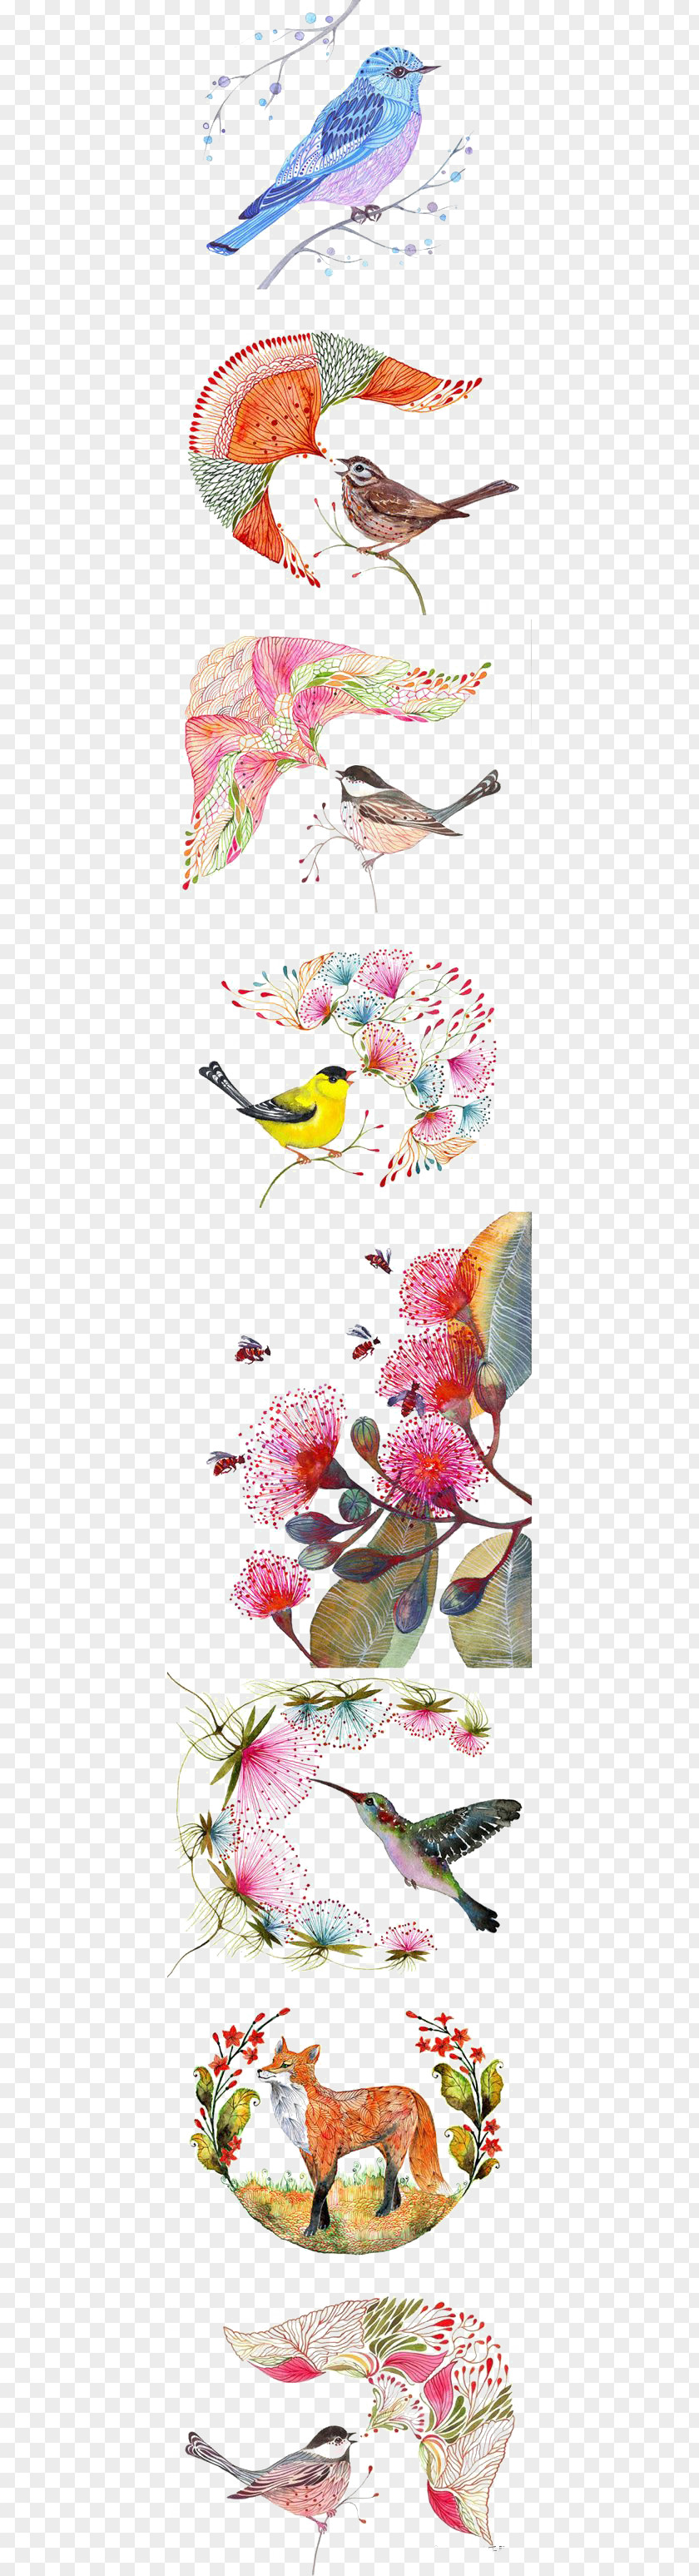 Bird Pattern Owl Drawing Watercolor Painting Illustration PNG